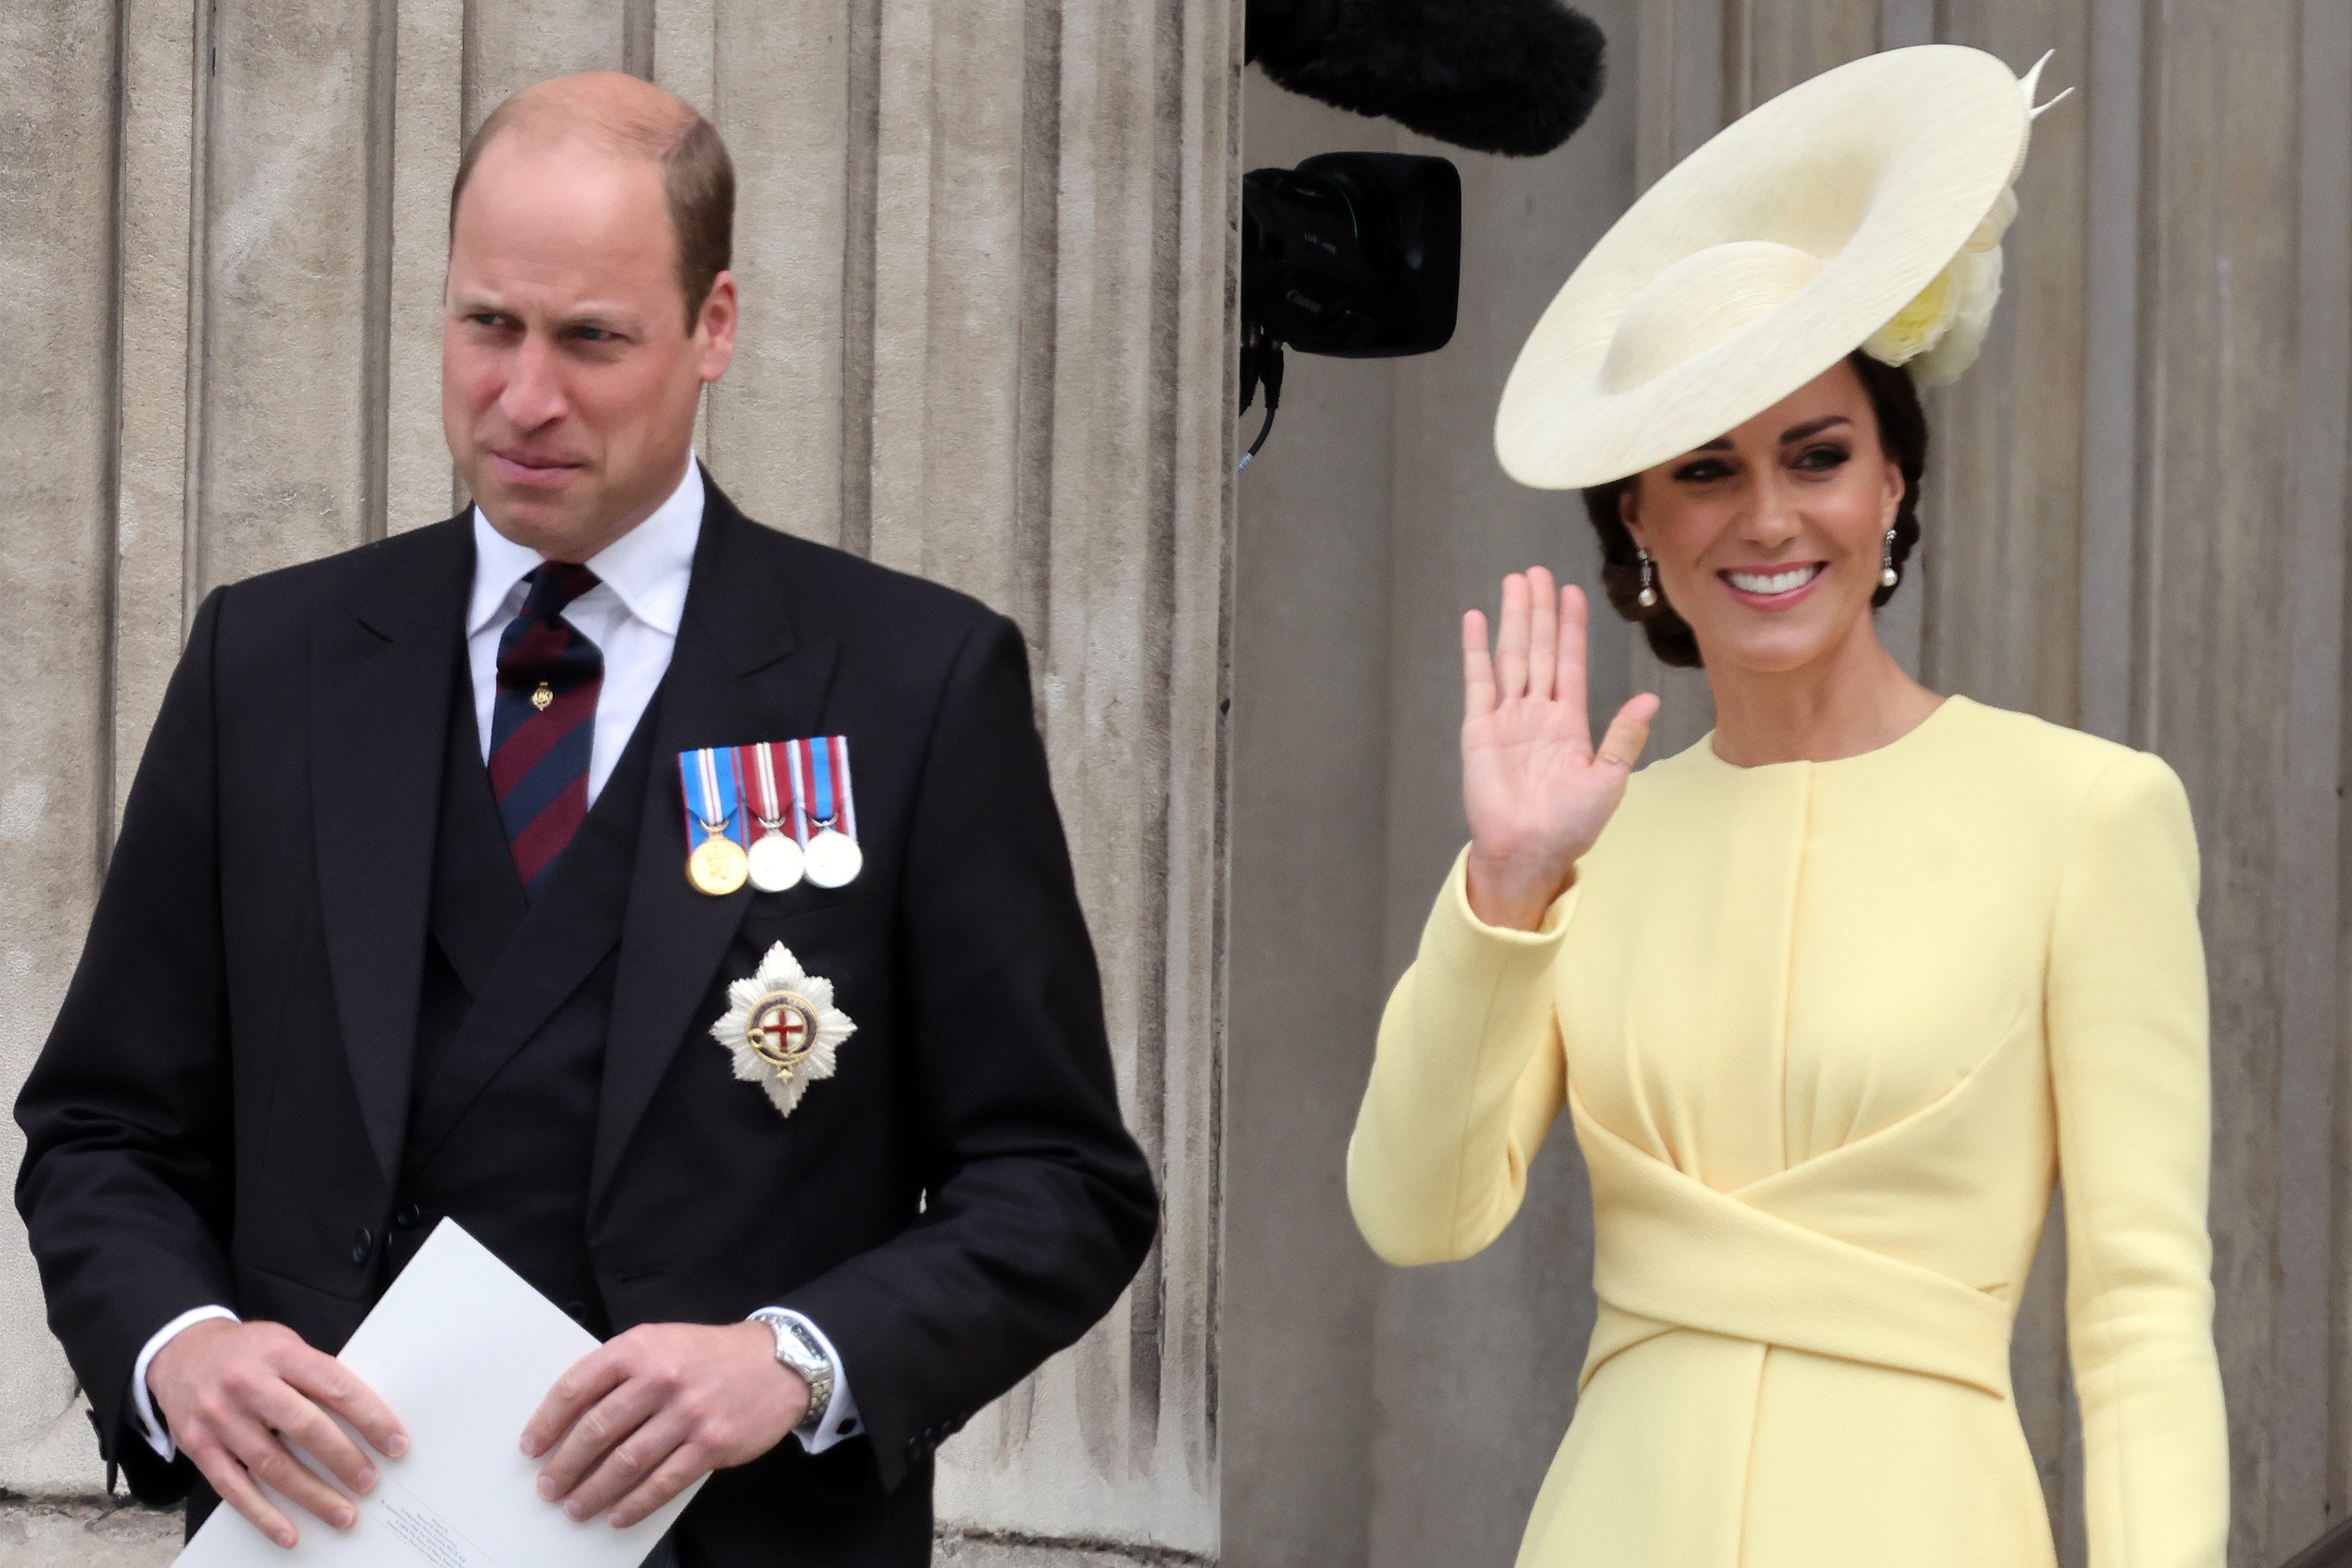 Prince William and Duchess Kate departing St. Paul's Cathedral after the Queen Elizabeth II Platinum Jubilee National Service of Thanksgiving on June 3, 2022, in London, England | Source: Getty Images